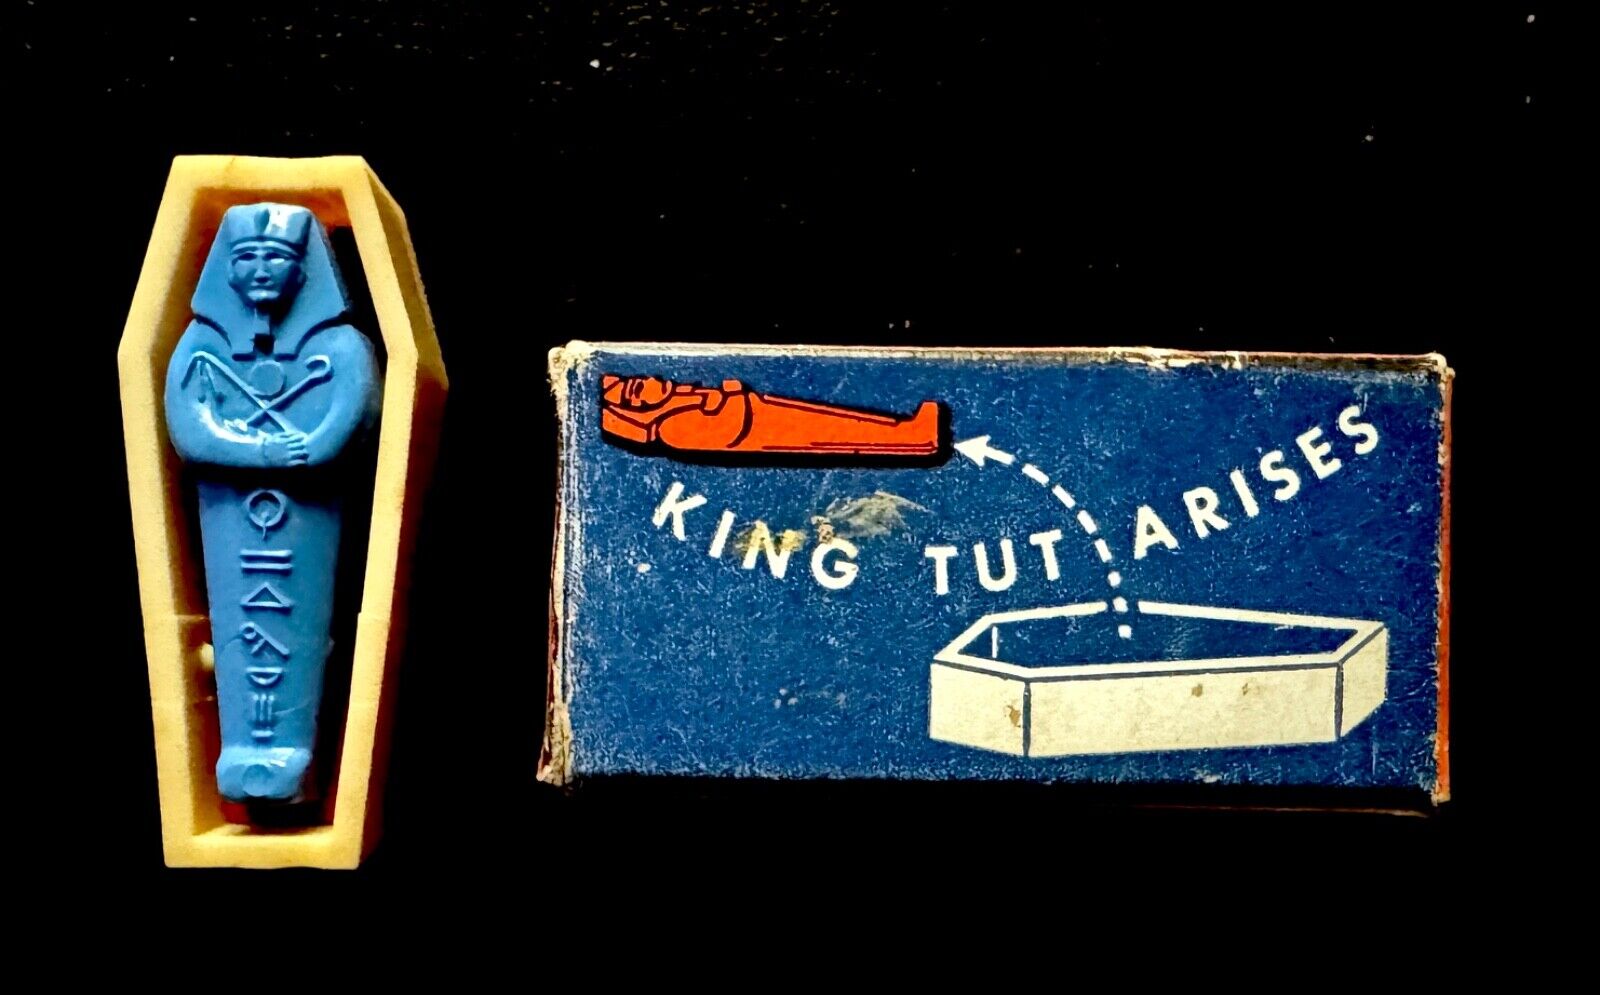 Vintage King Tut Magic Mummy Novelty Toy - with box - late '50's/early '60's